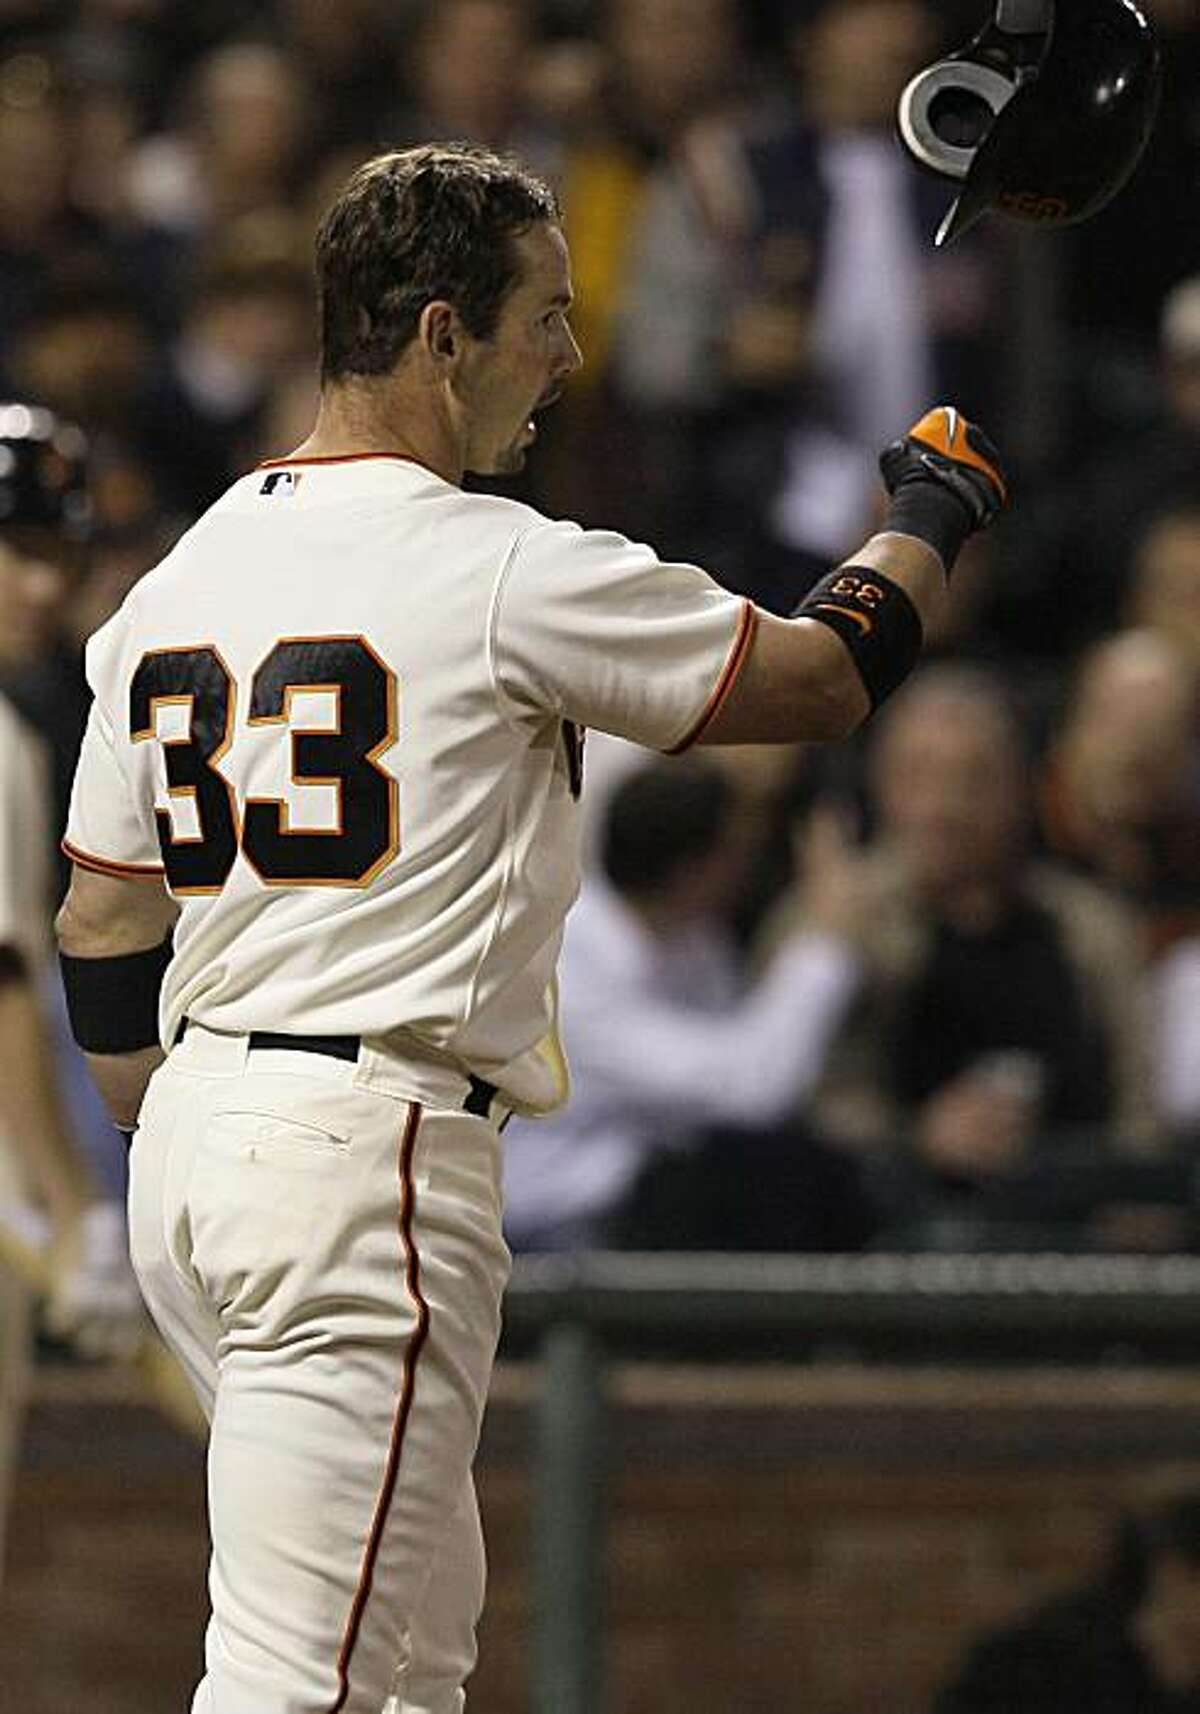 San Francisco Giants' Aaron Rowand throws his helmet after striking out against San Diego Padres' Clayton Richard to end the fifth inning of a baseball game in San Francisco, Wednesday, May 12, 2010.